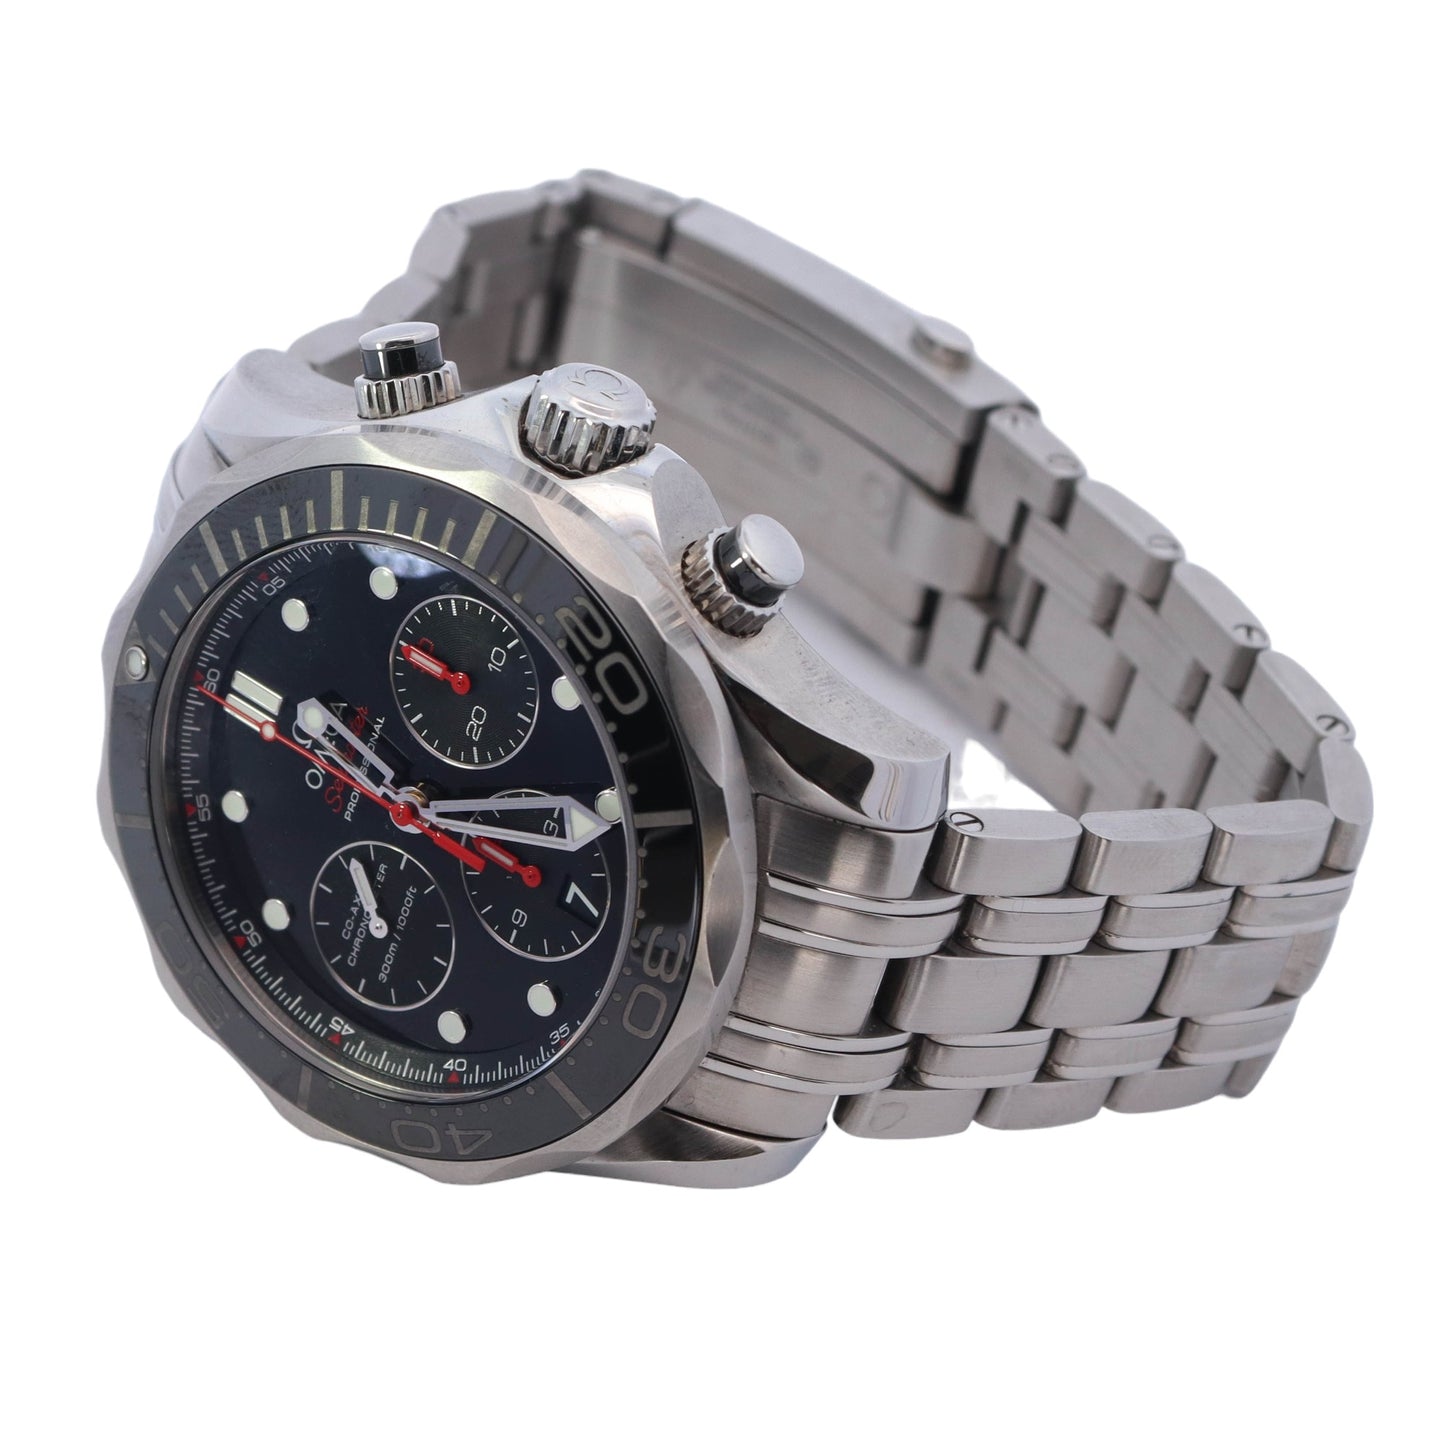 Omega Seamaster Chronograph 300m Stainless Steel 44mm Black Chronograph Dot Dial Watch  Reference #: 212.30.44.50.01.001